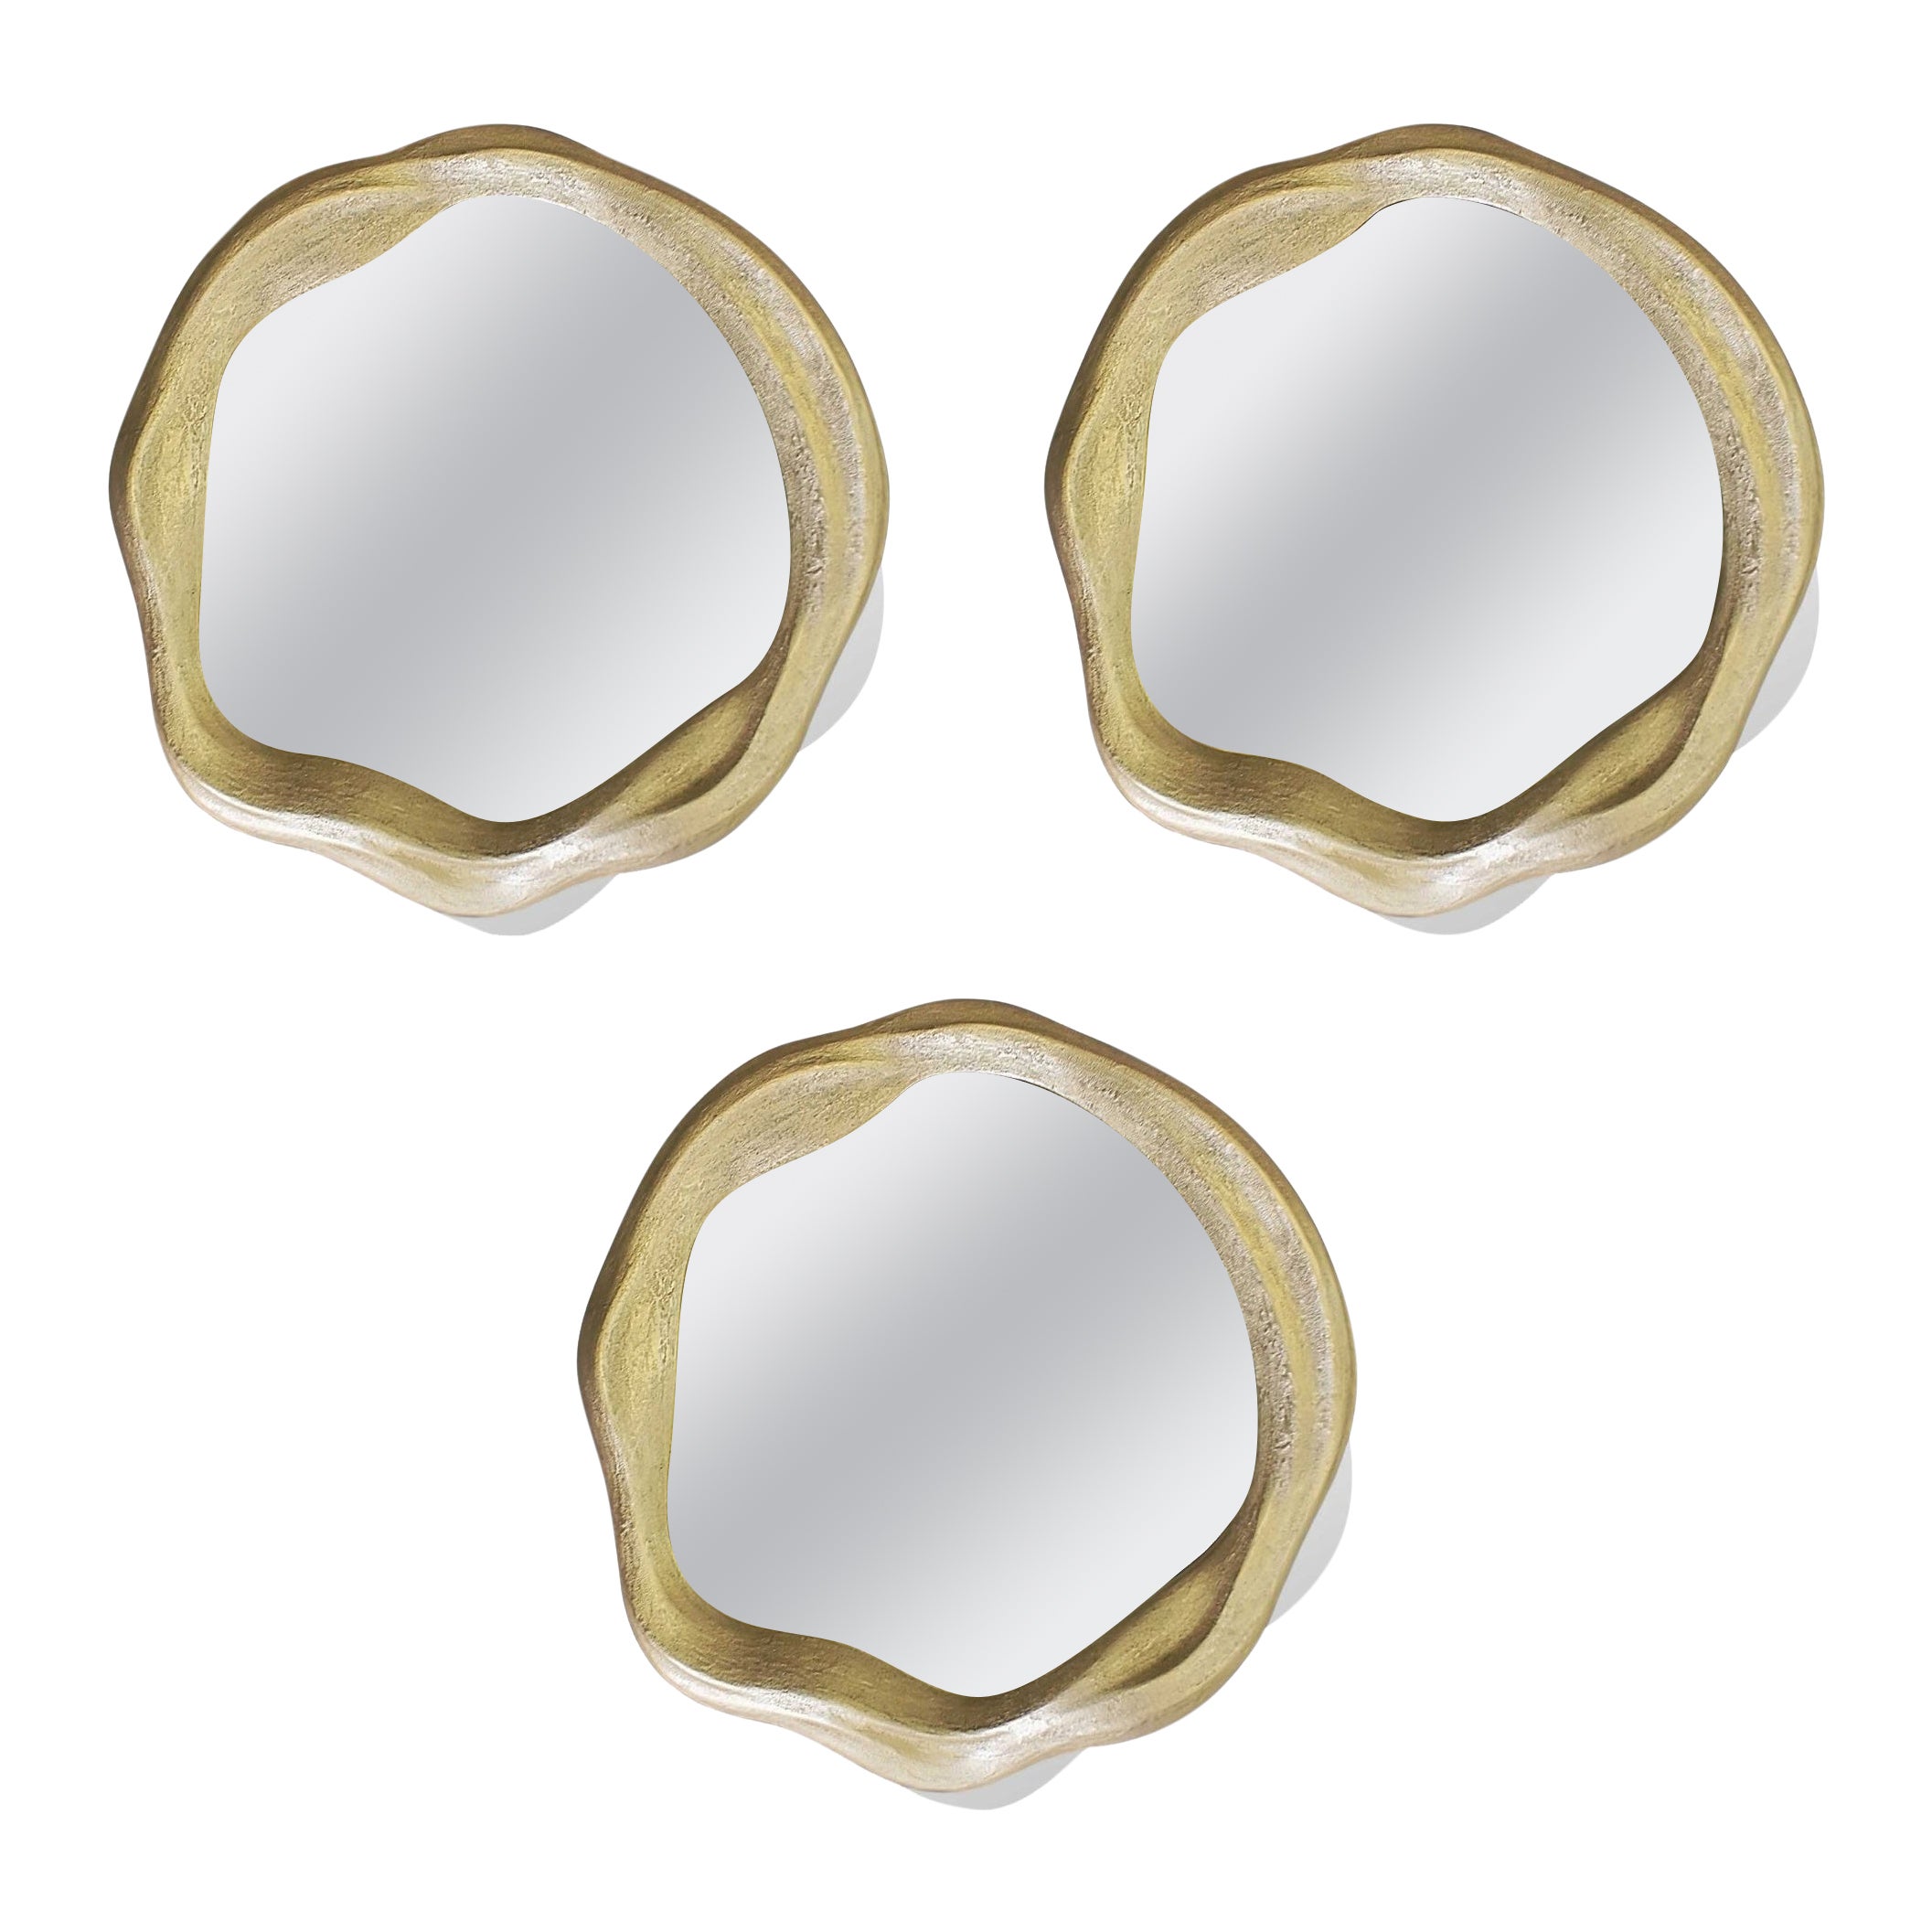 New Set of 3 Mirrors in Resin and Fiberglass Lacquered Color Gold